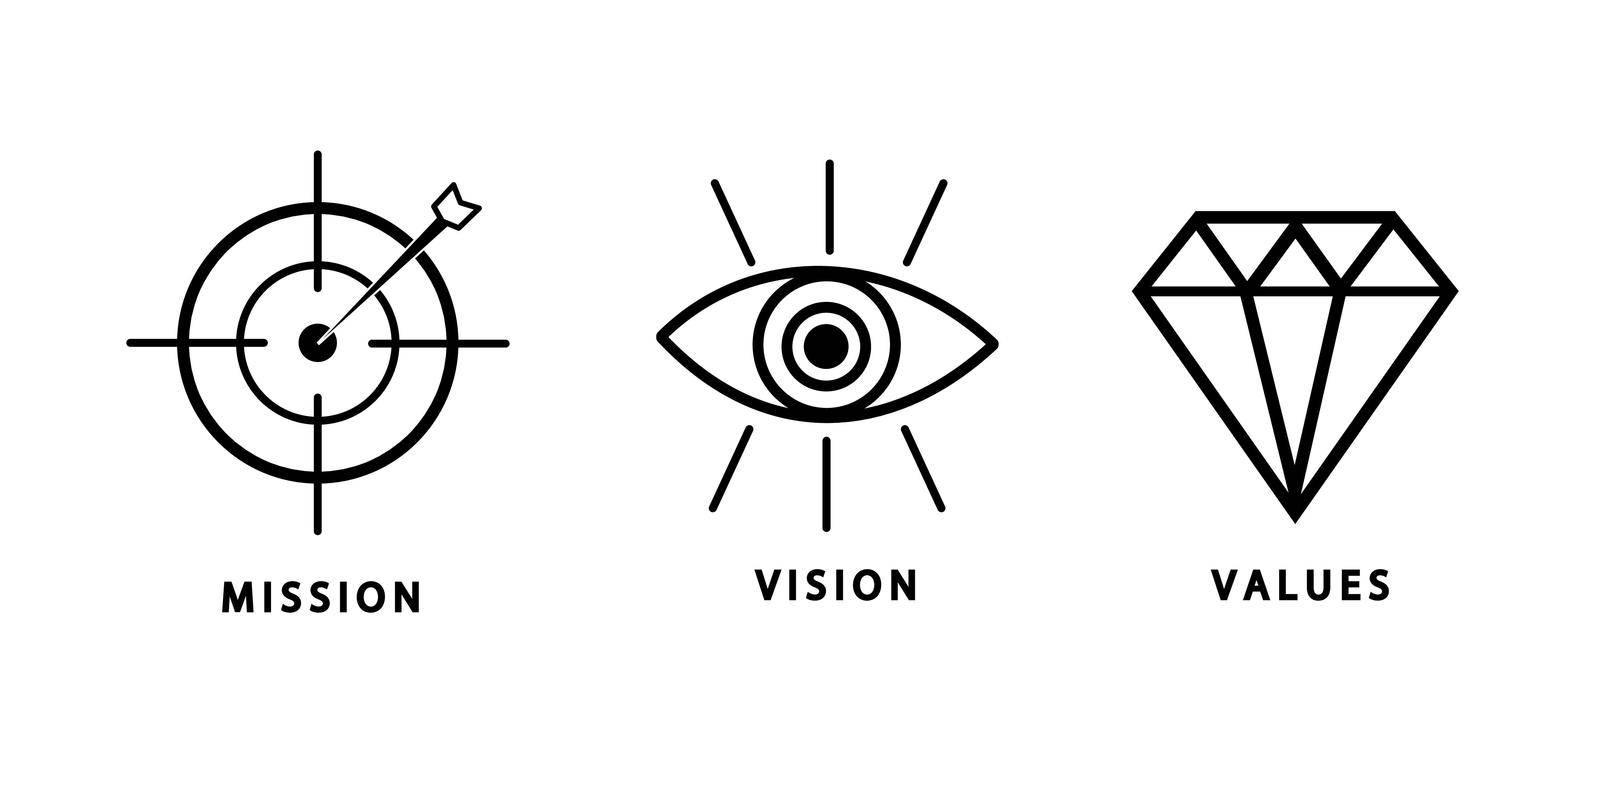 Mission vision values icon . Organization mission vision values icon design vector by Olgaufu